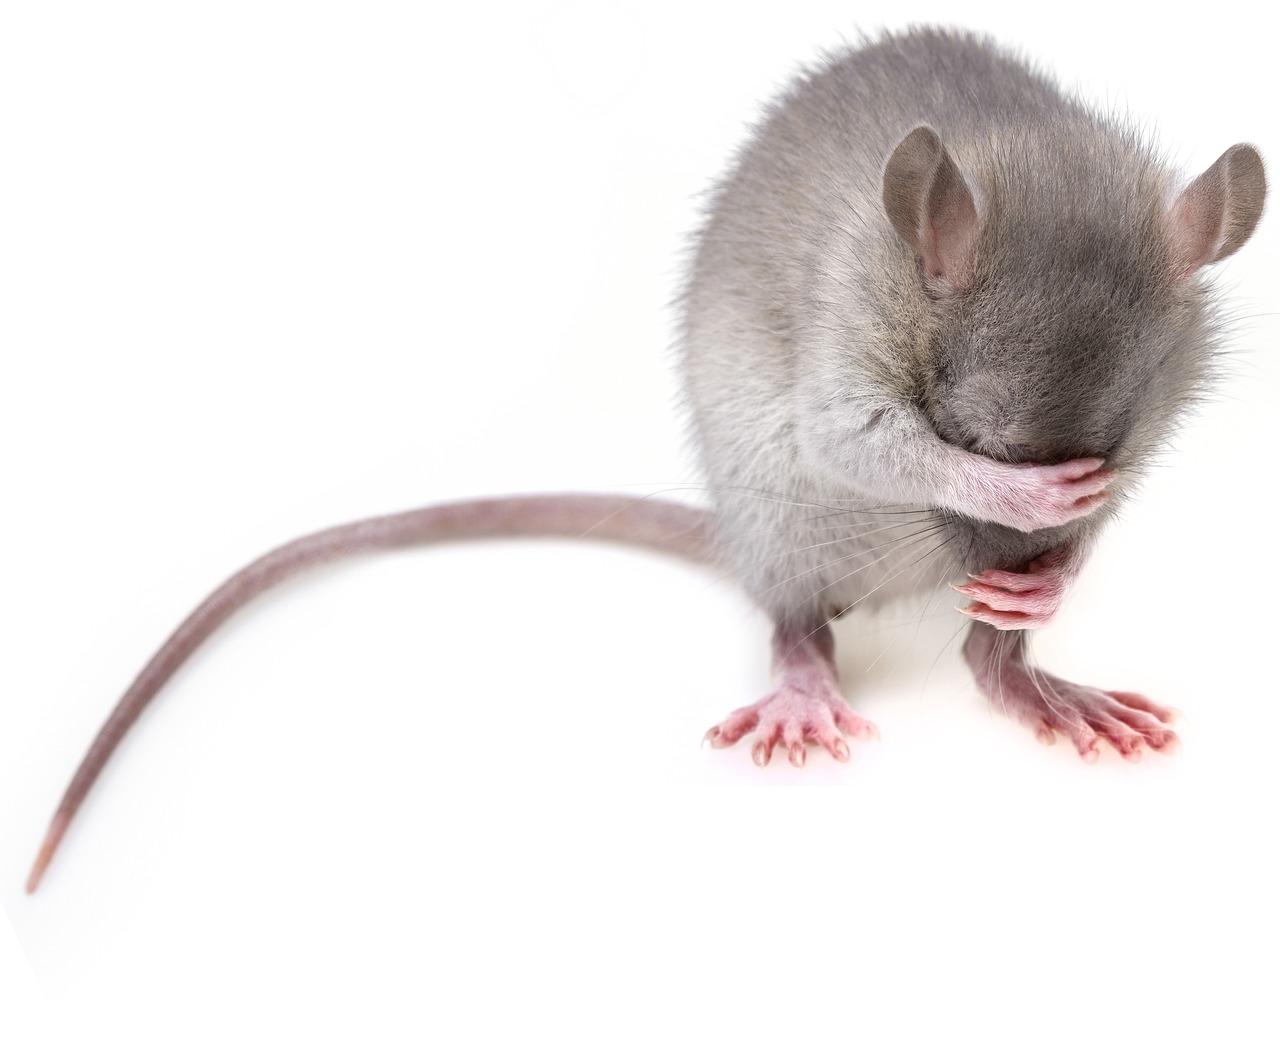 Rats tend to avoid hurting other rats